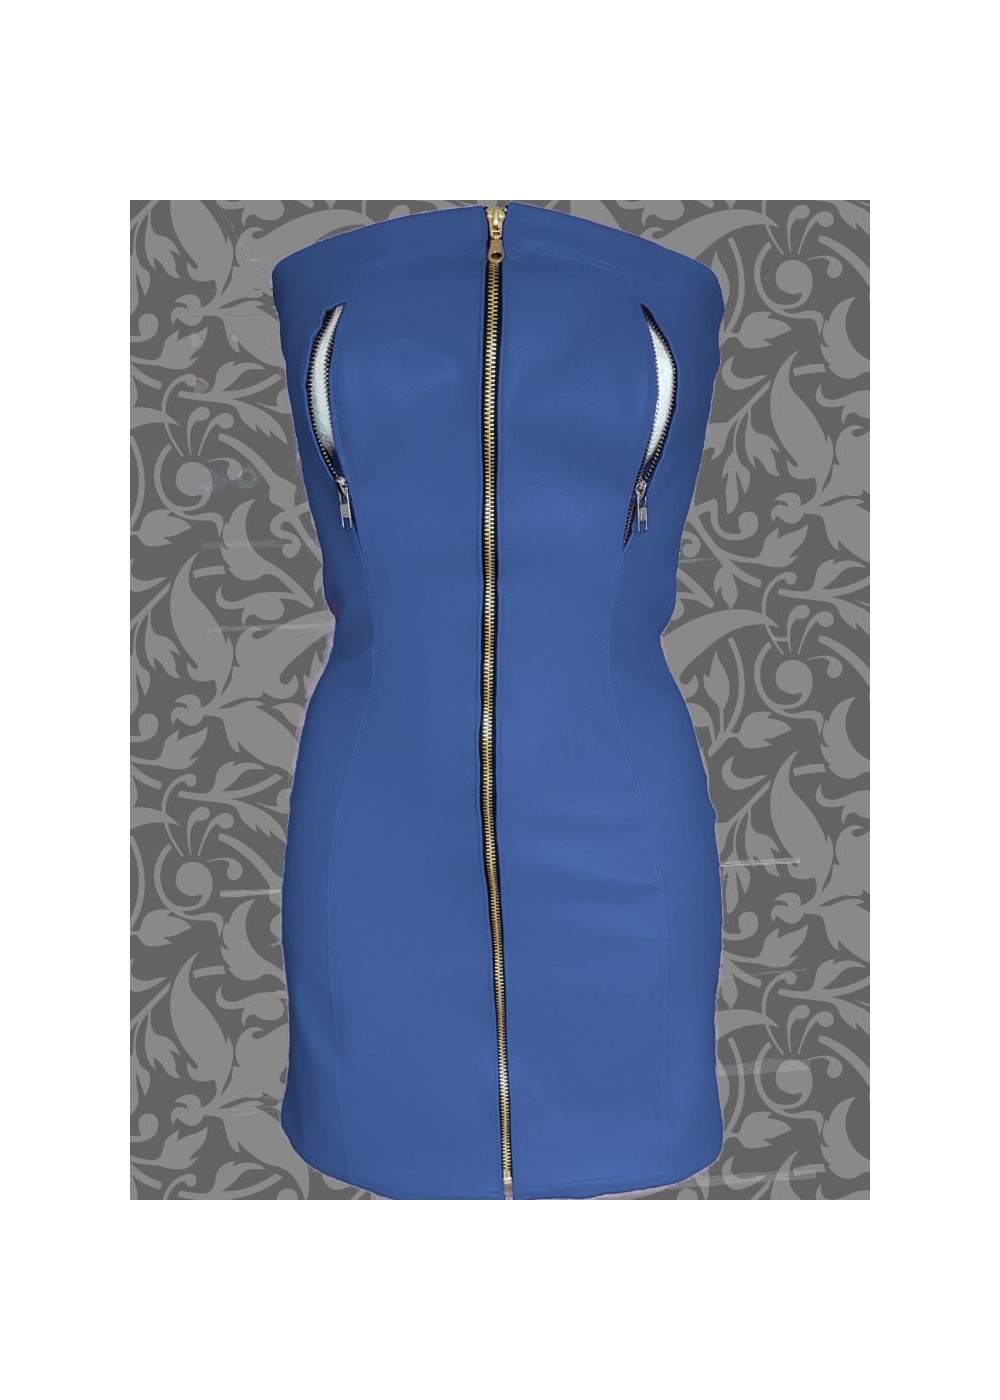 Nipple-free soft leather dress blue with zippers - 